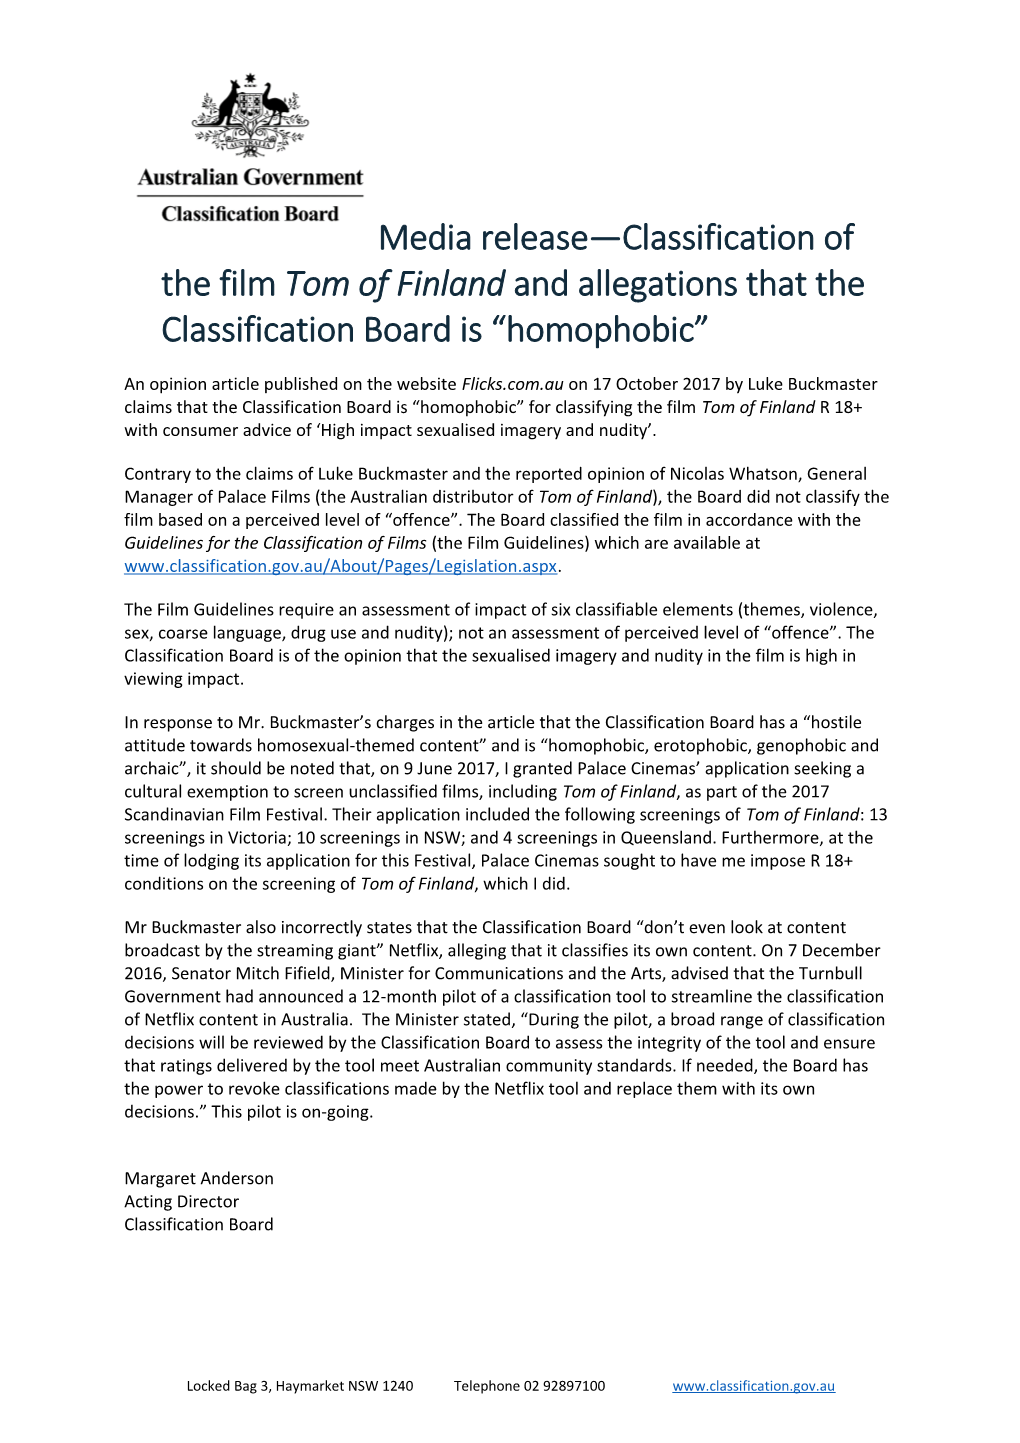 Media Release Classification of the Film Tom of Finland and Allegations That the Classification